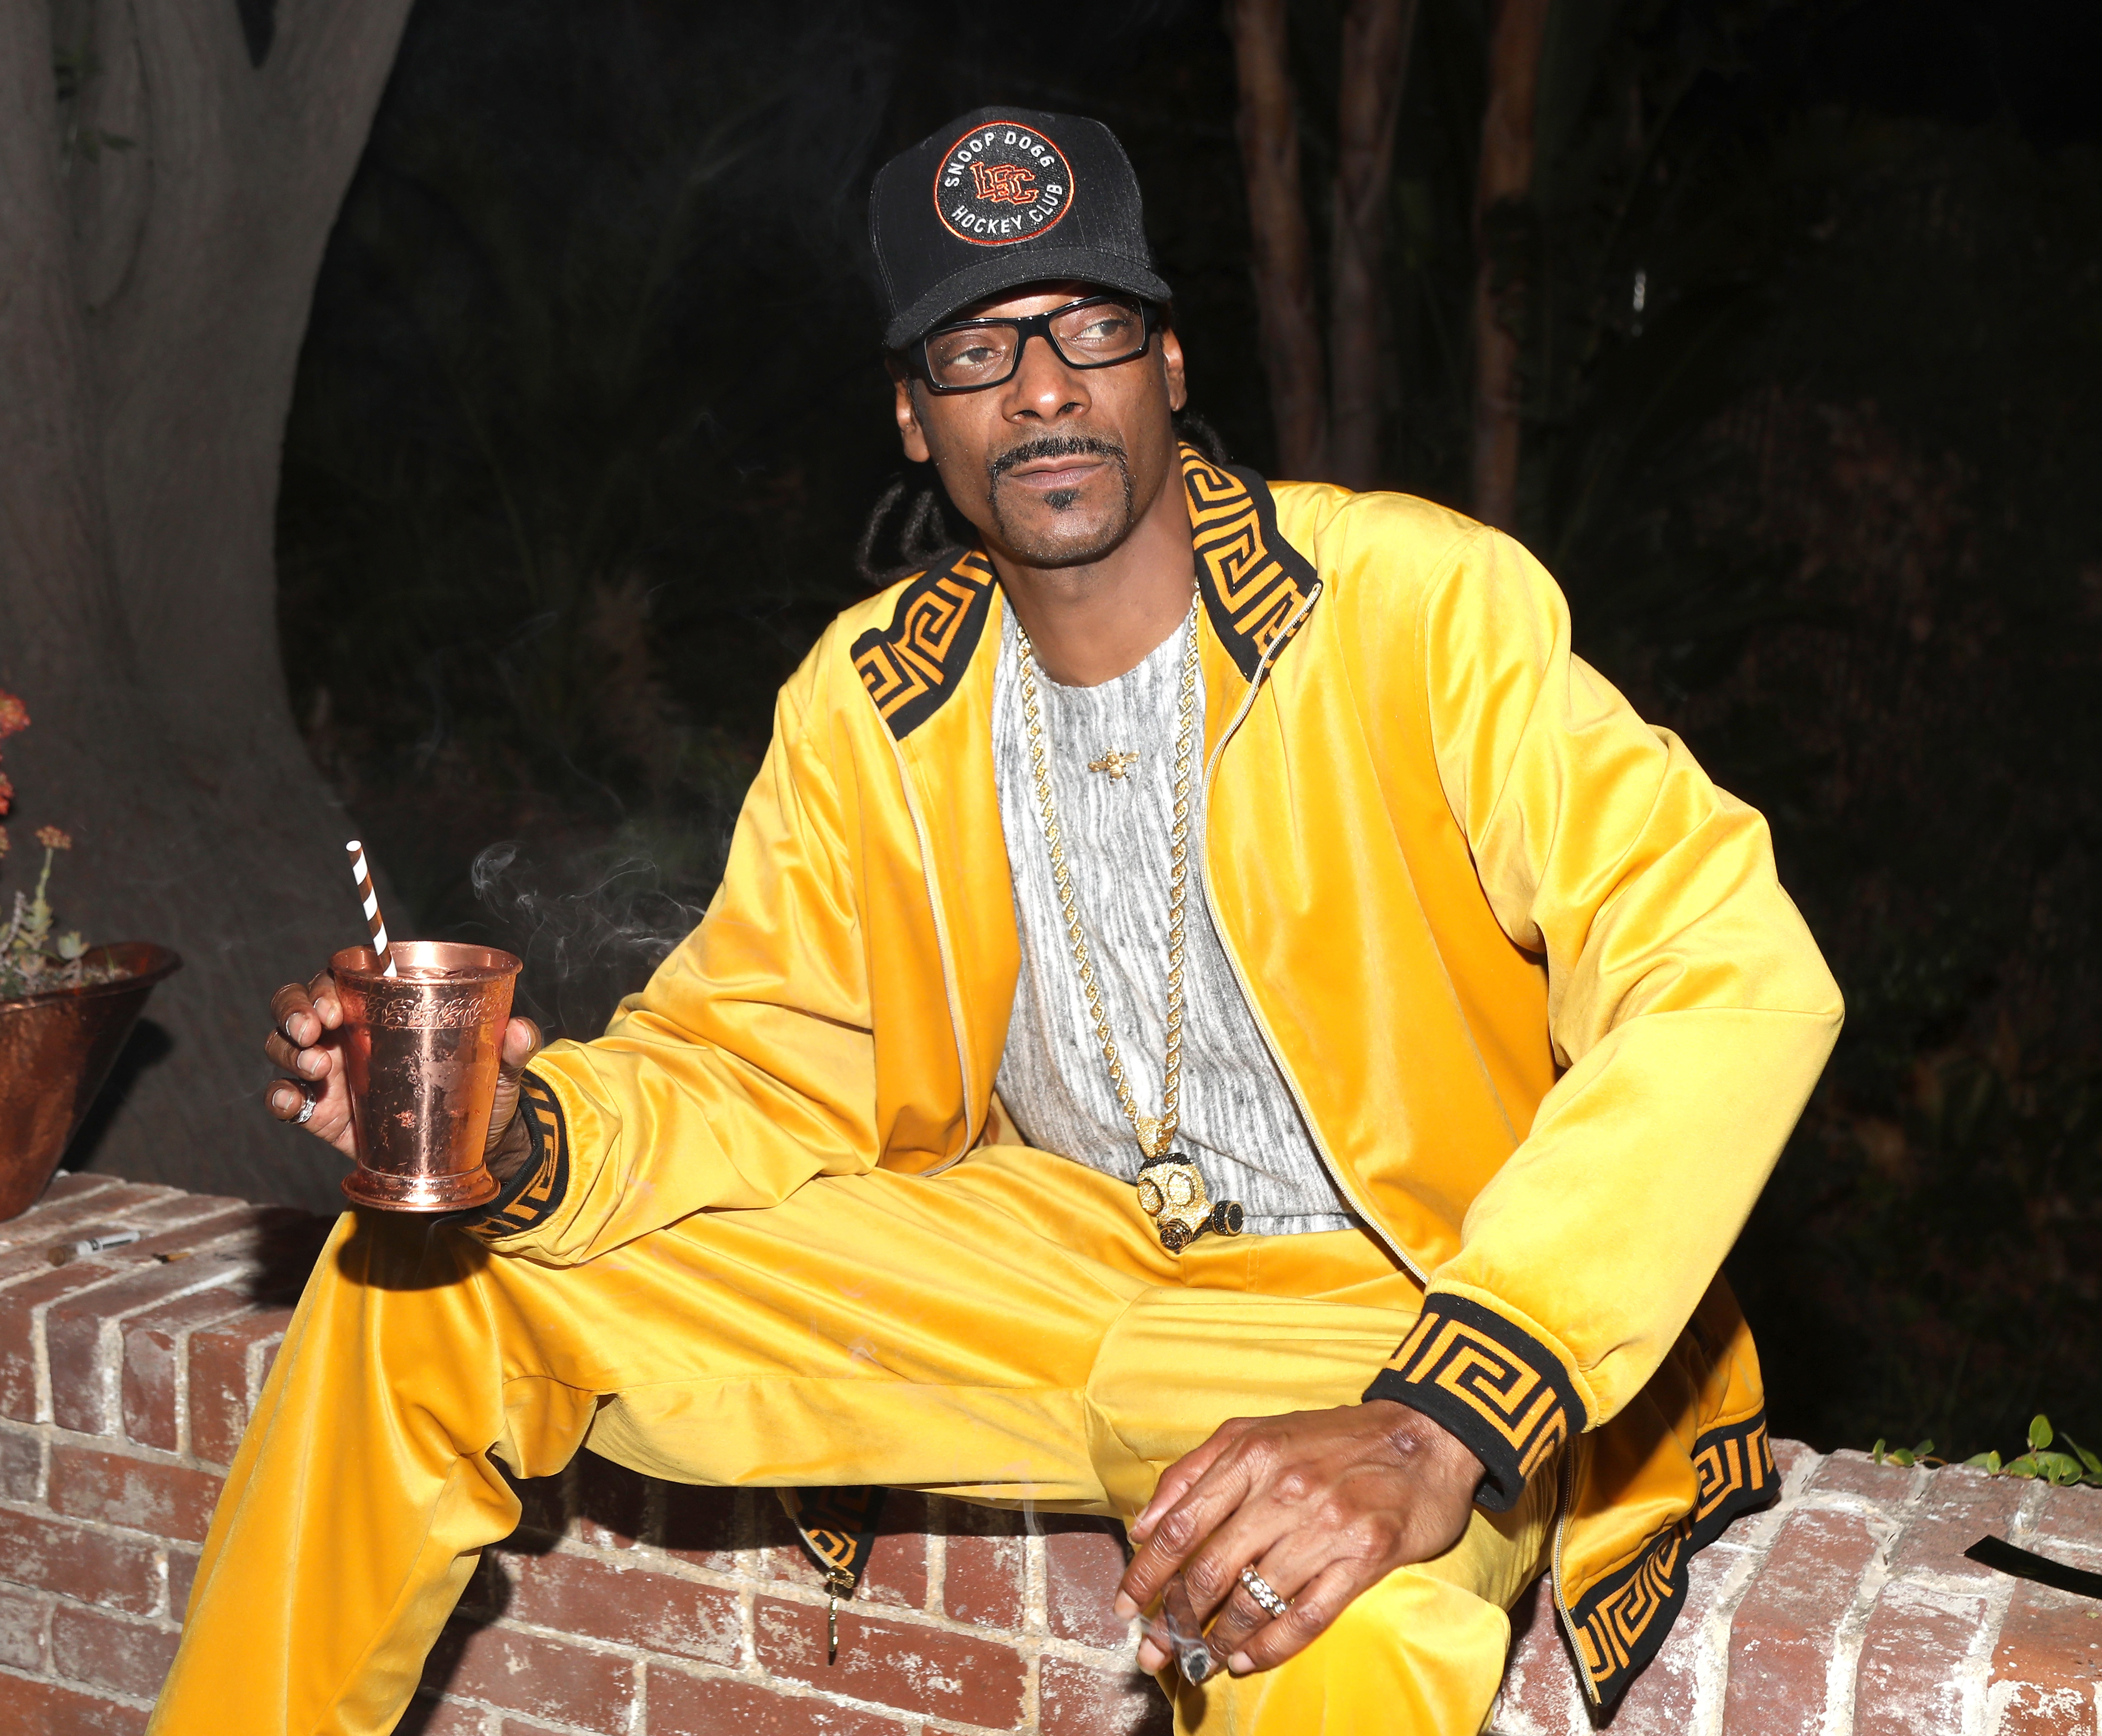 Snoop Dogg sits casually holding a copper mug, wearing a yellow and black tracksuit with intricate designs